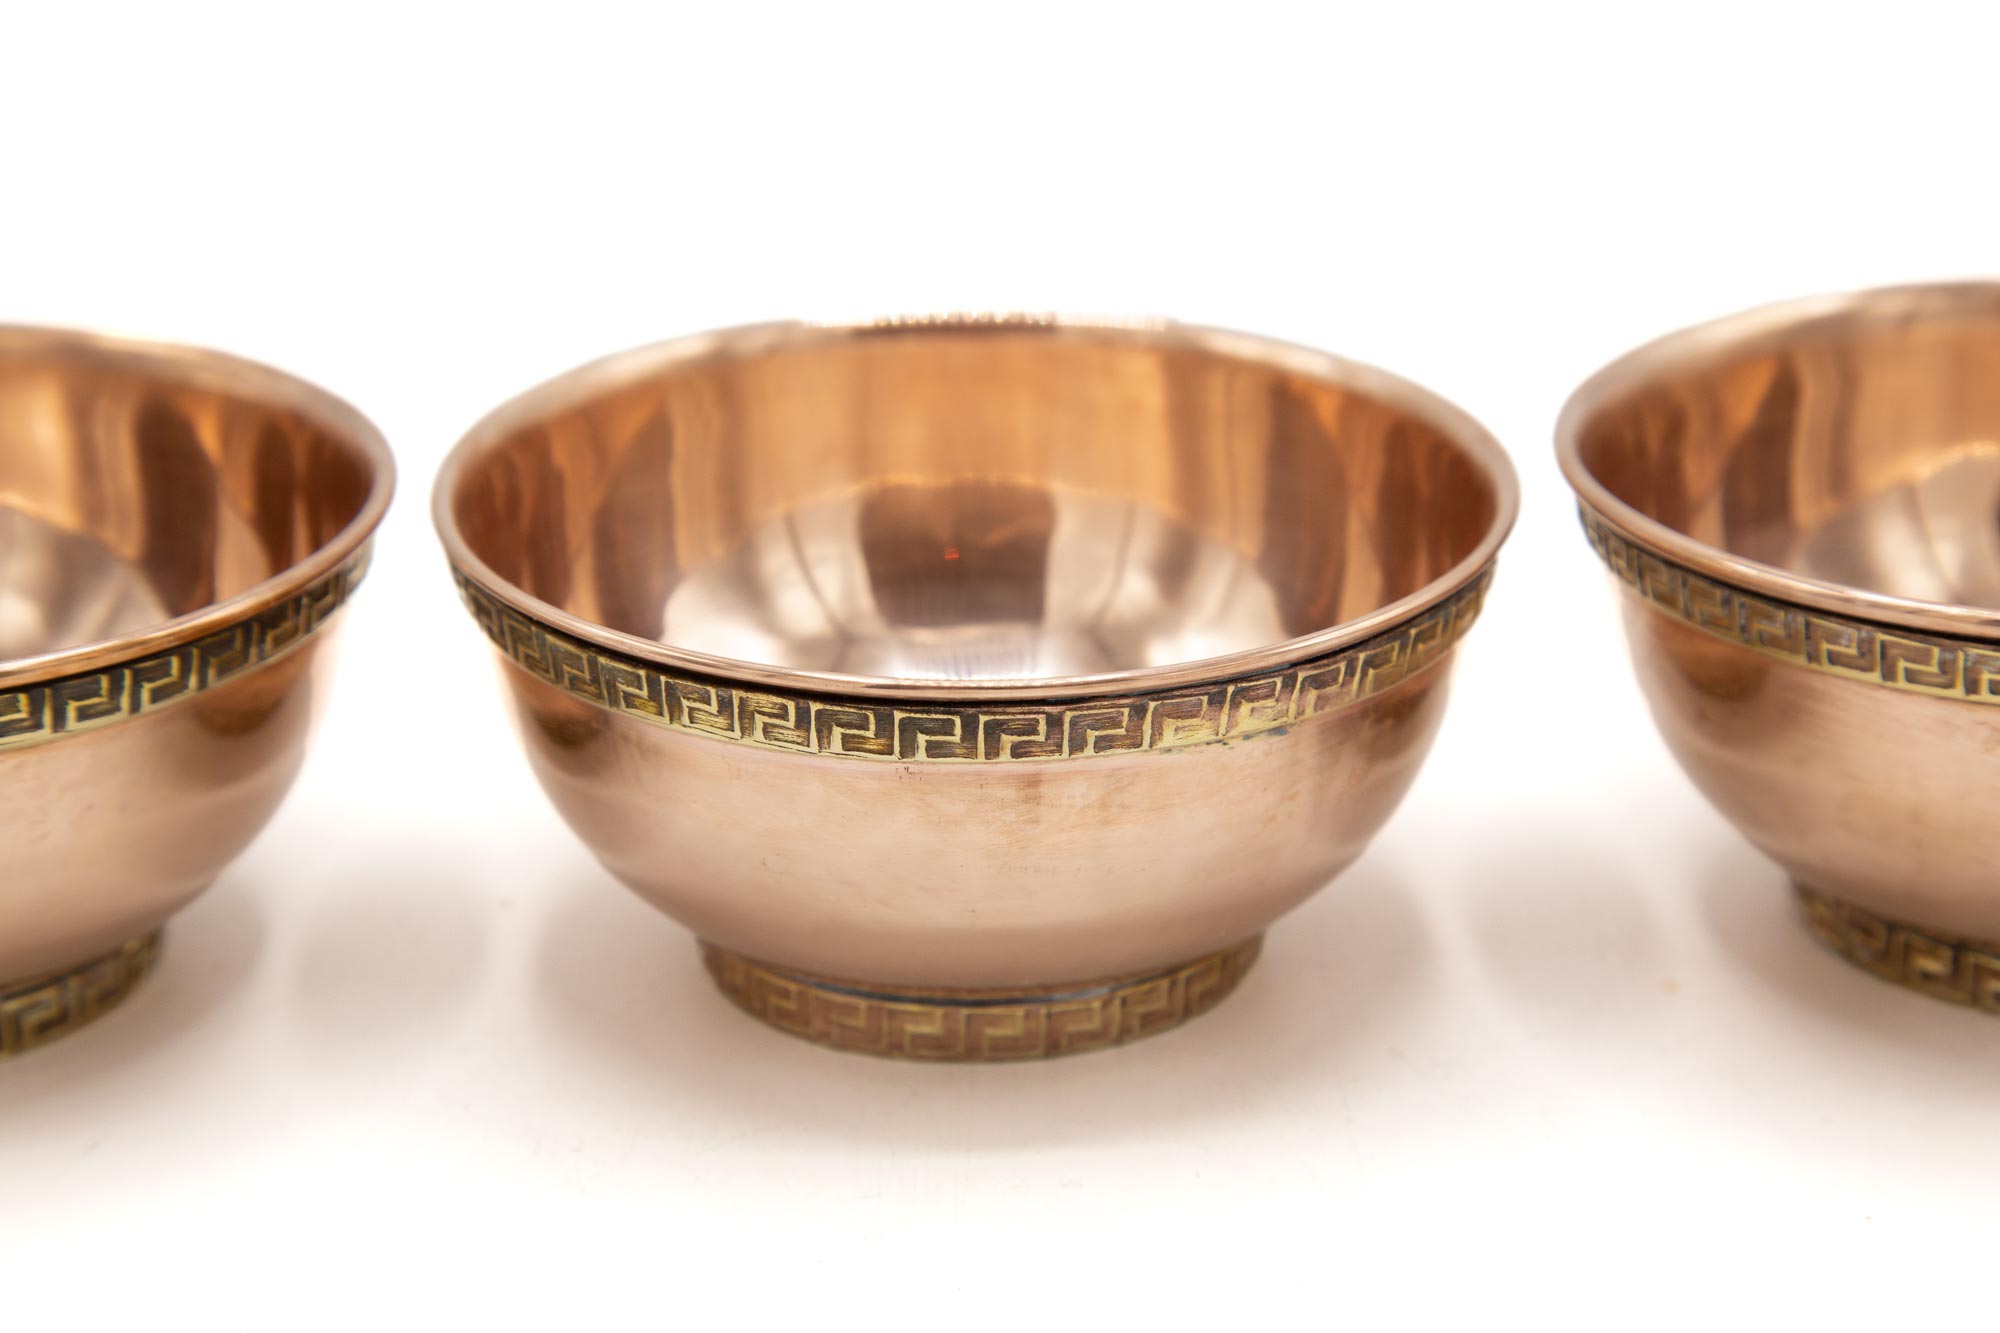 Copper and Brass Offering Bowls - 4.25"